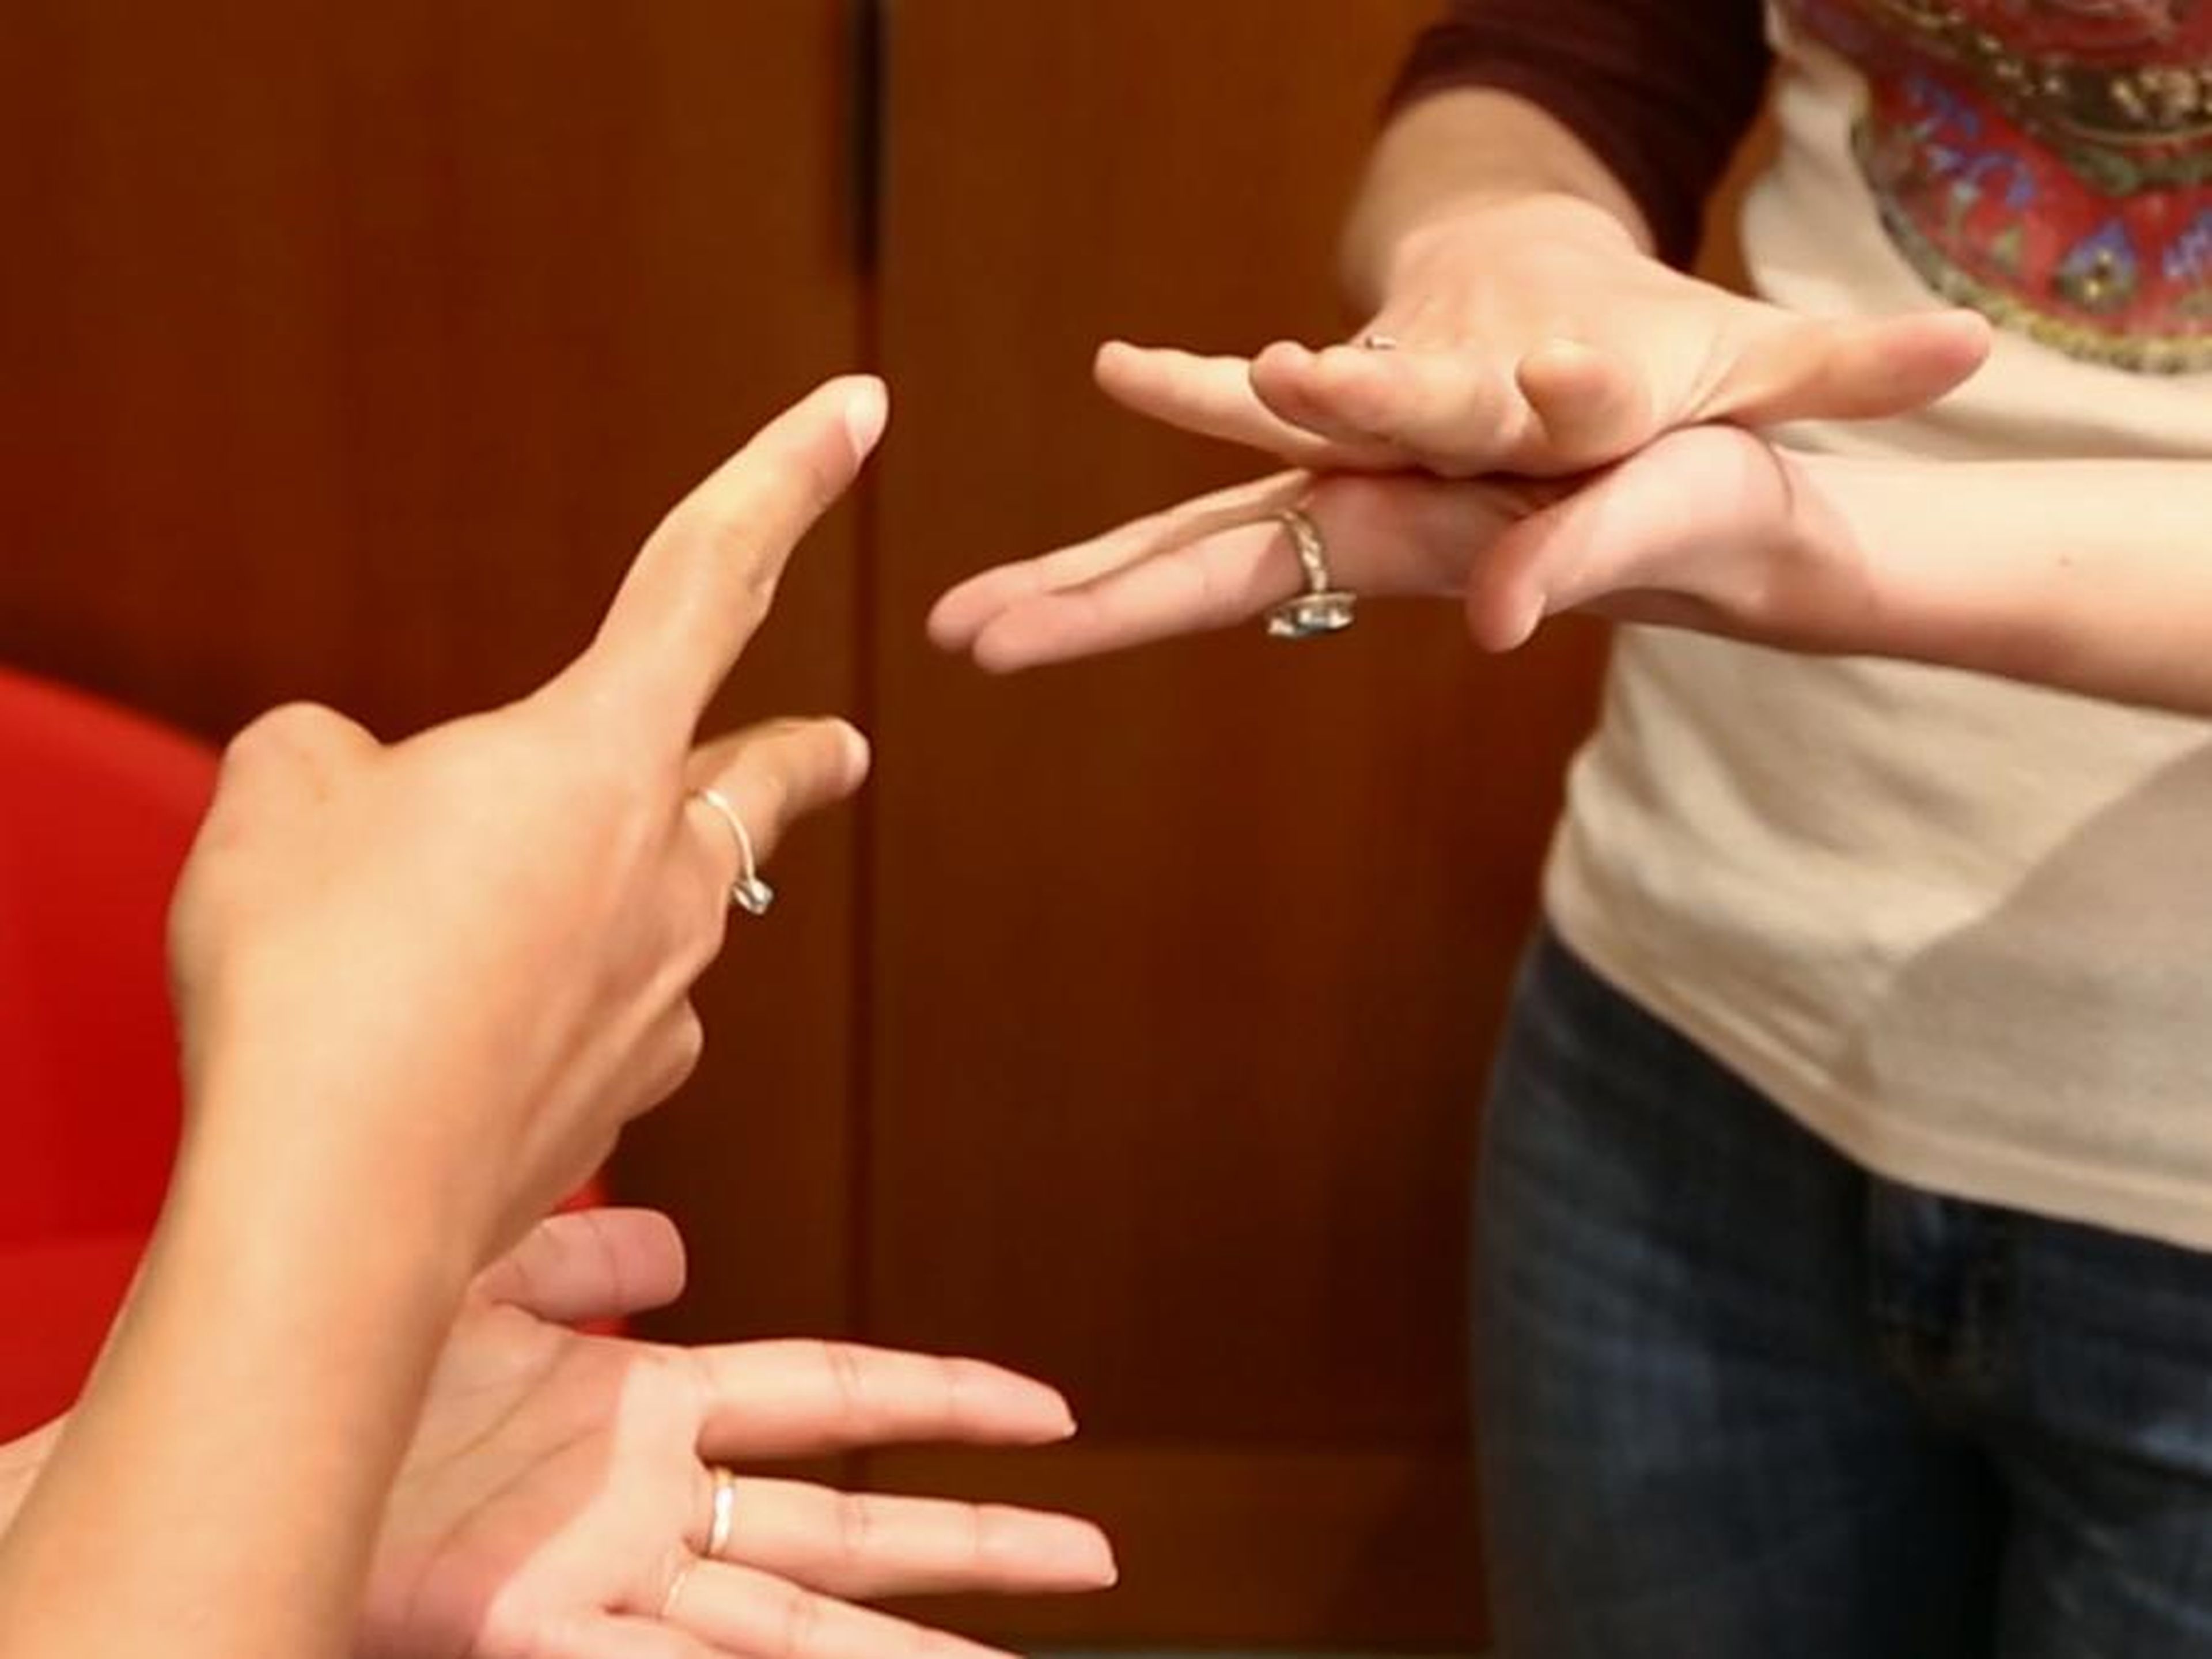 One woman was asked to convince her prospective employers why she should be hired, and she suggested a game of rock, paper, scissors